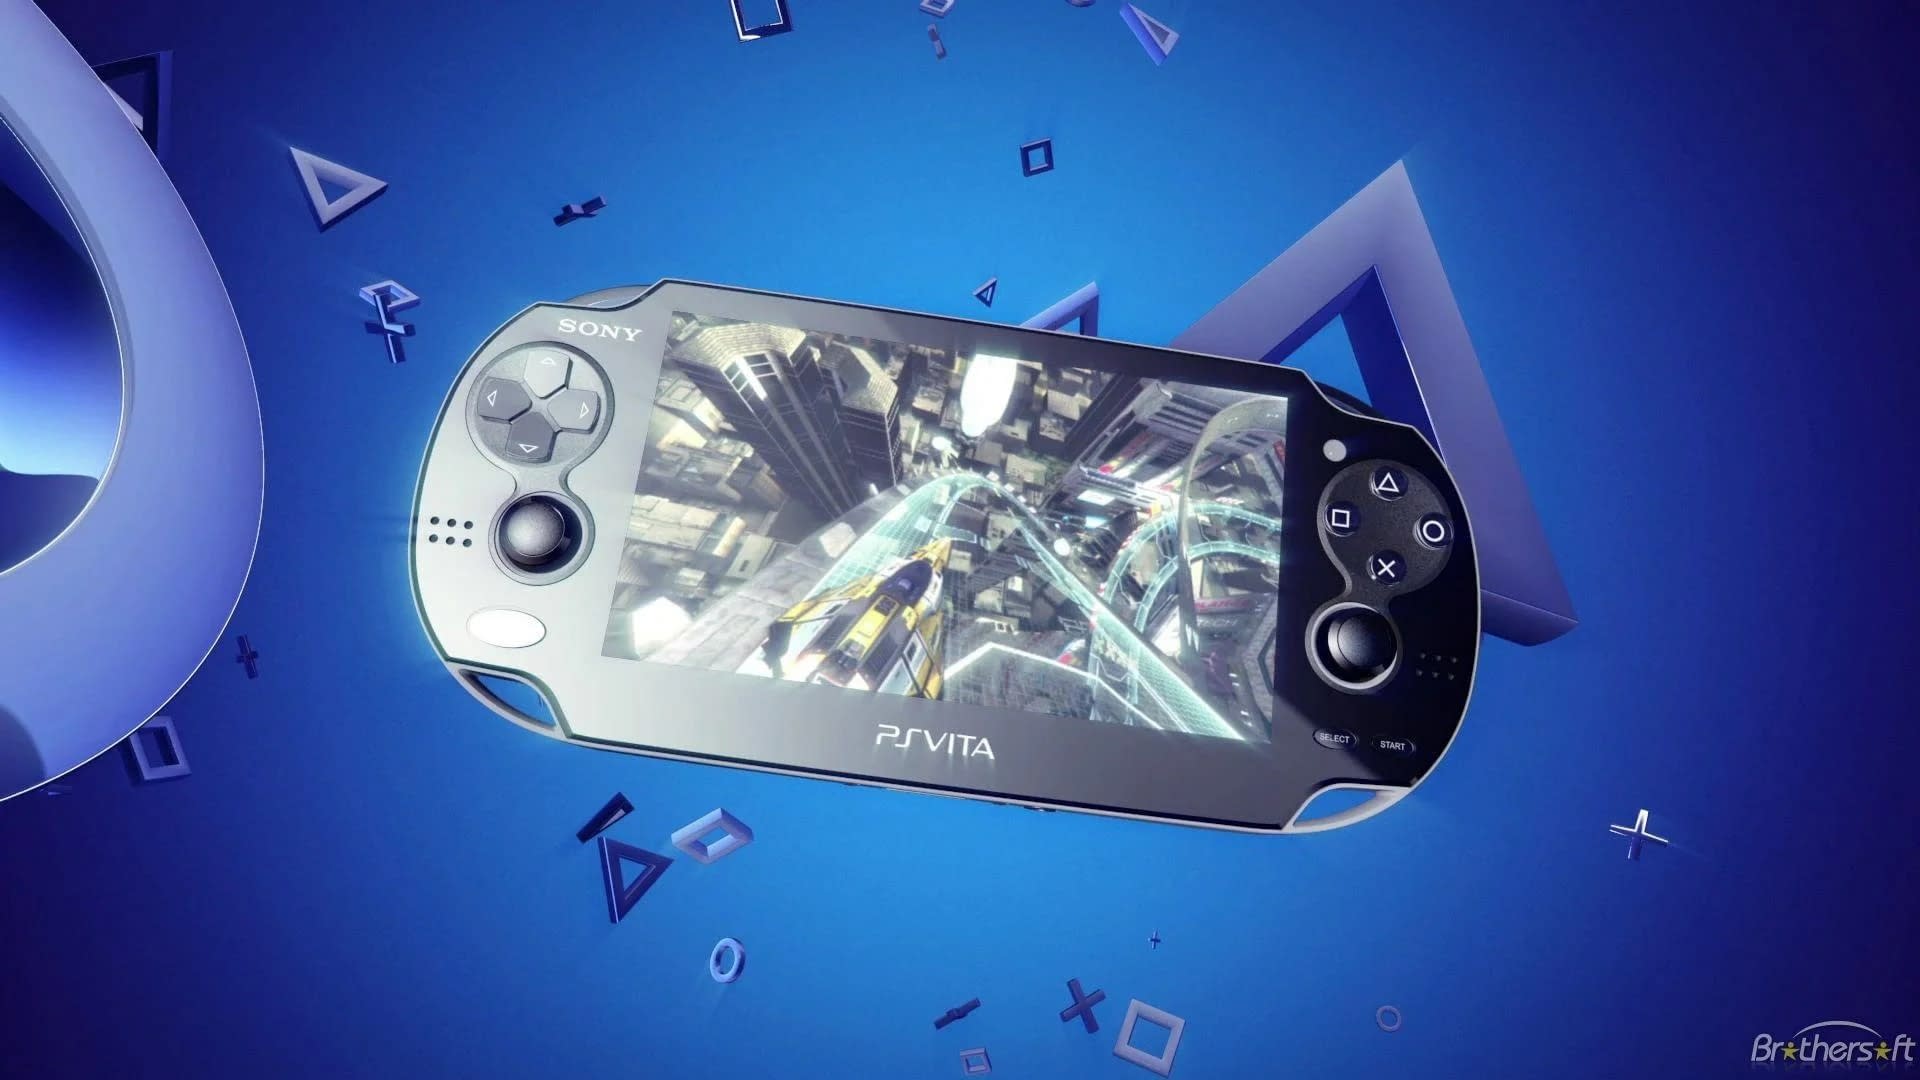 Is Playstation Vita 2 console on the road?